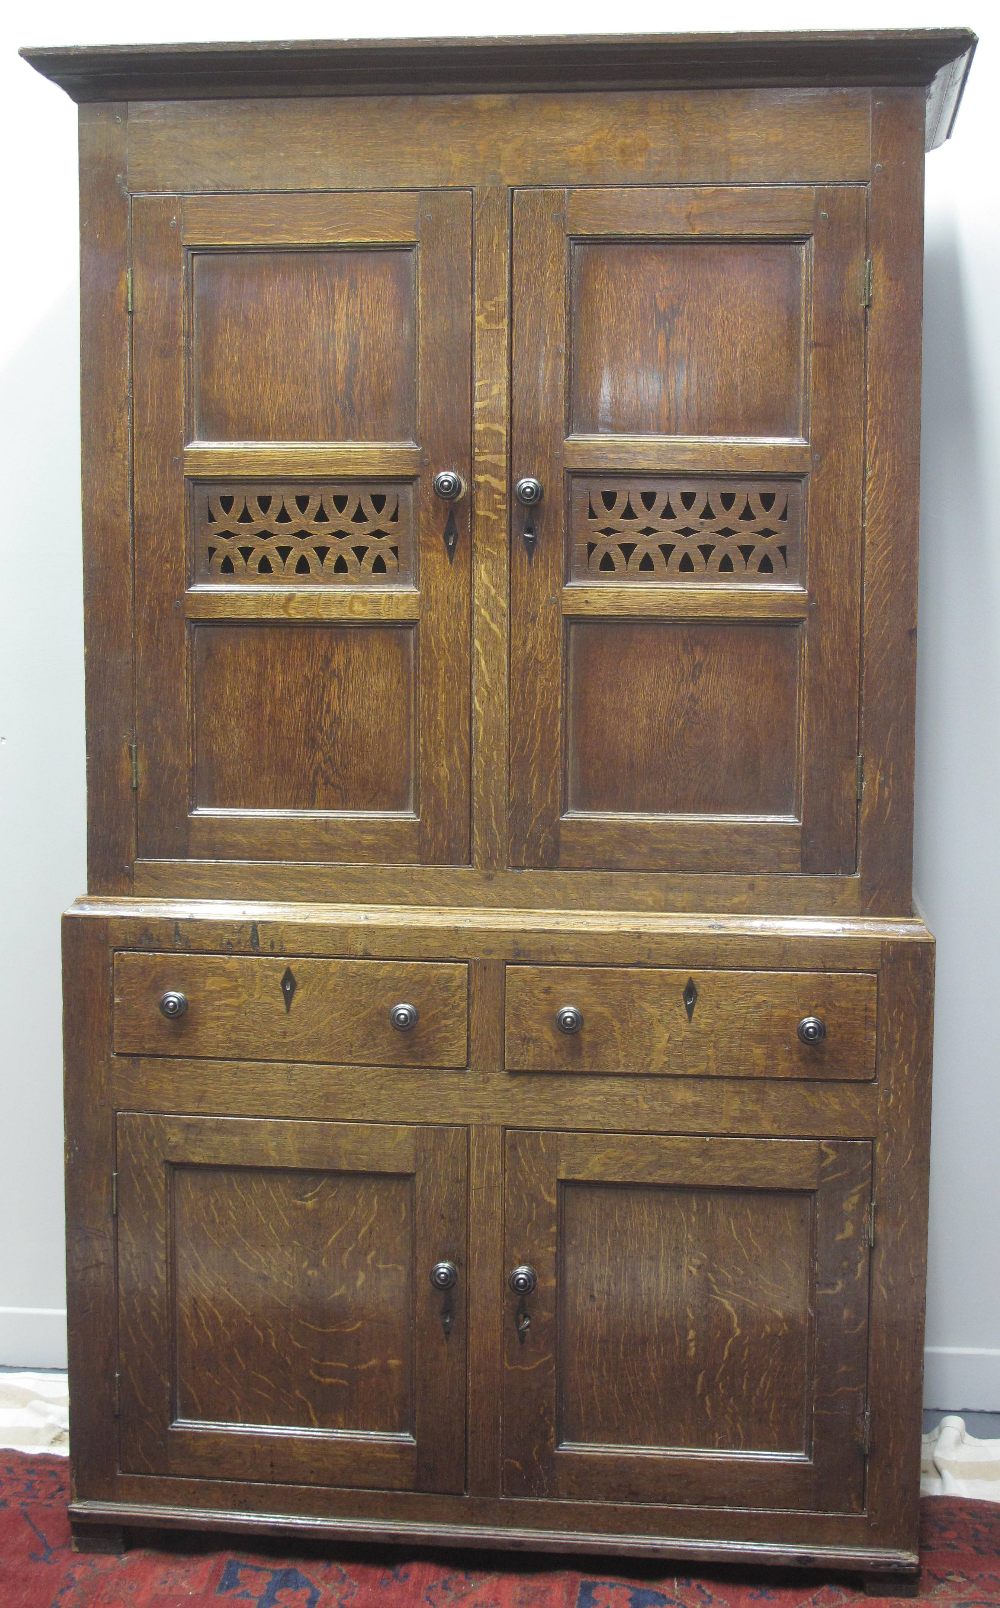 EARLY 19TH CENTURY NORTH WALES OAK AND PINE TWO STAGE FOOD CUPBOARD,